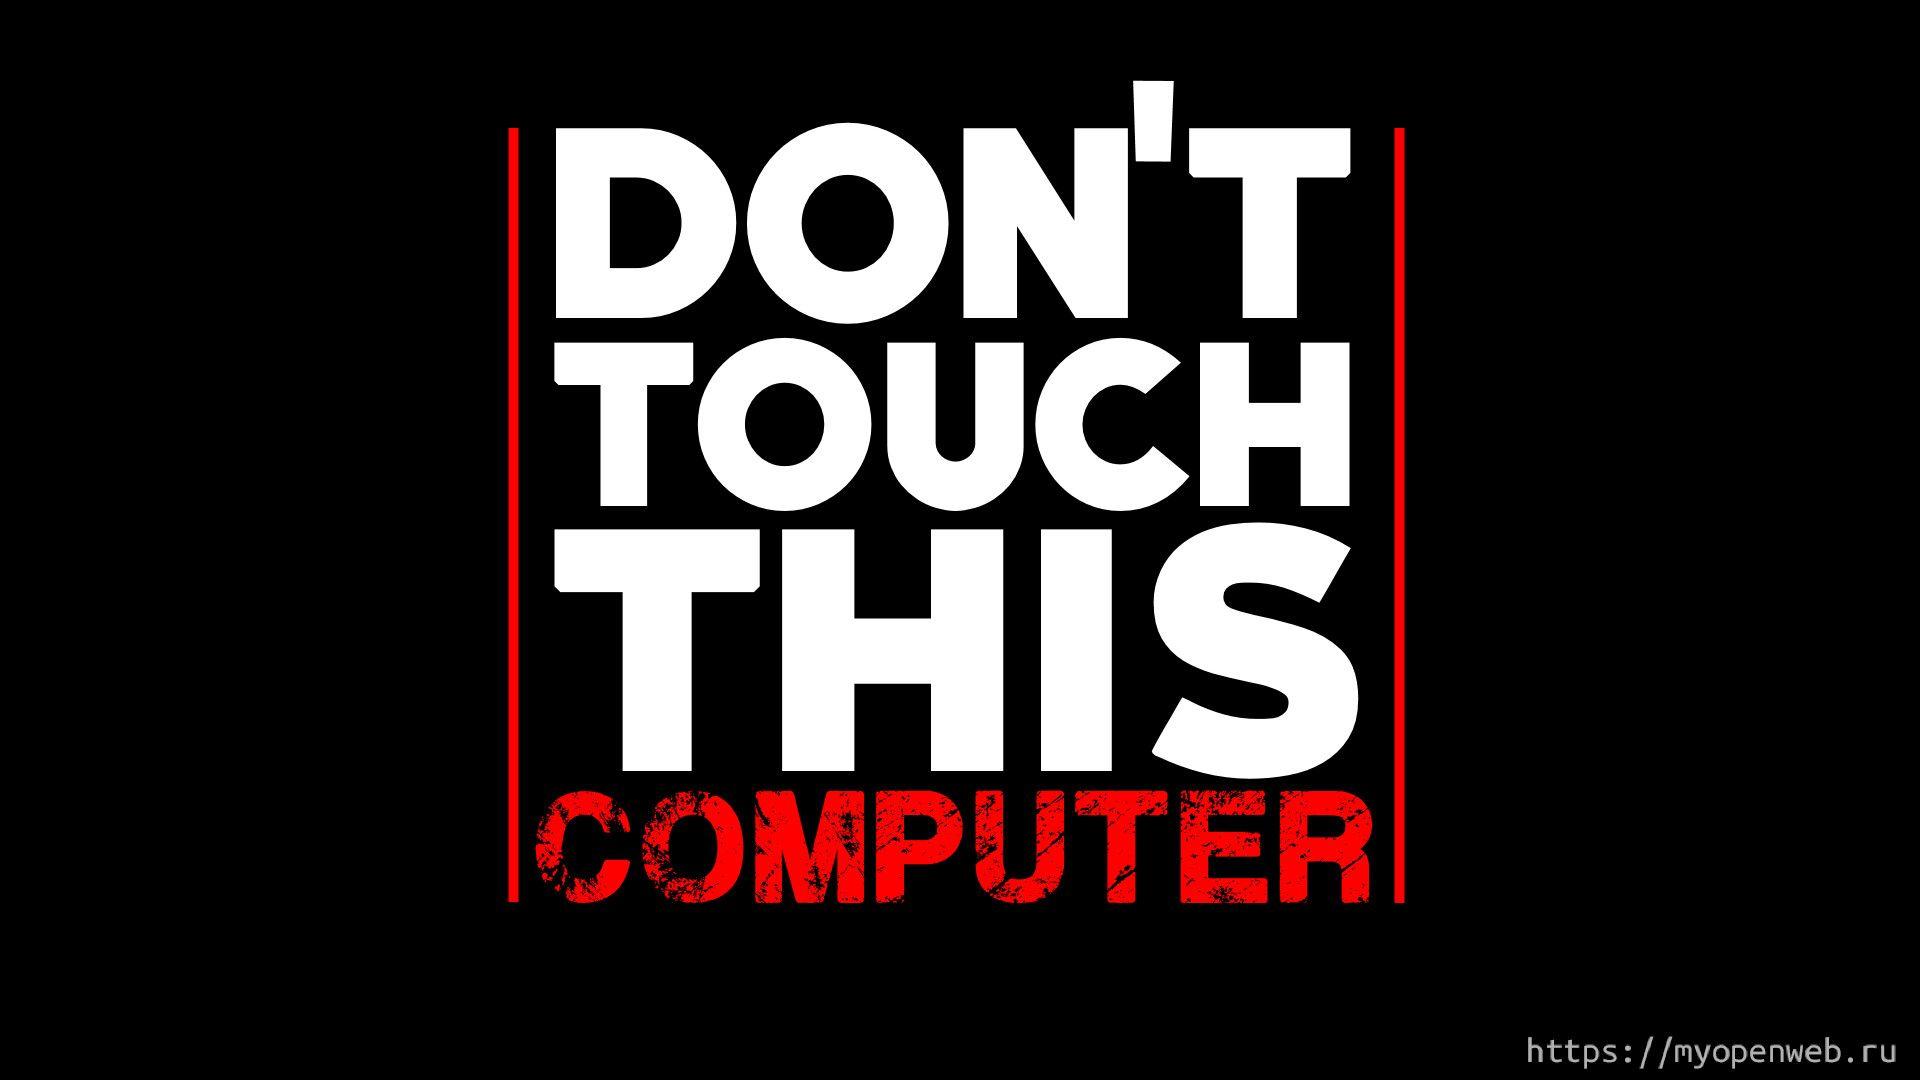 Dont Touch My PC Screensaver Downloadcom. Laptop wallpaper, Dont touch, Dont touch my phone wallpaper